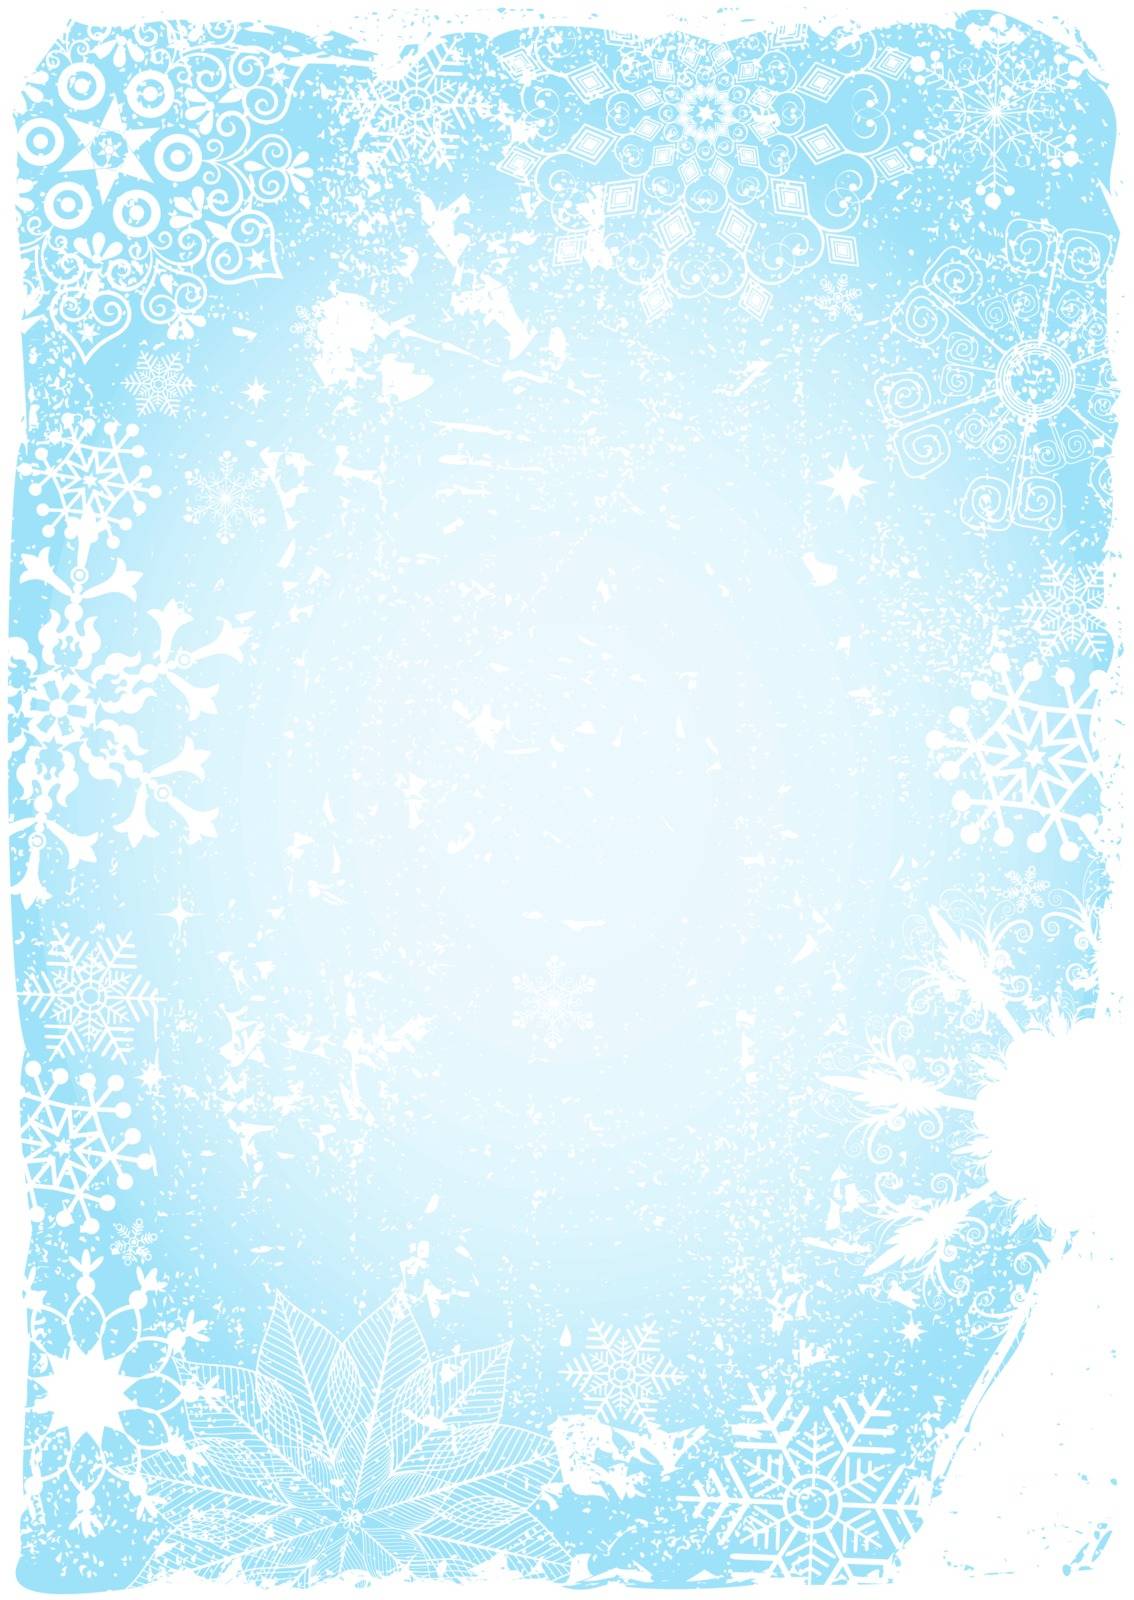 Blue grungy christmas card by OlgaDrozd